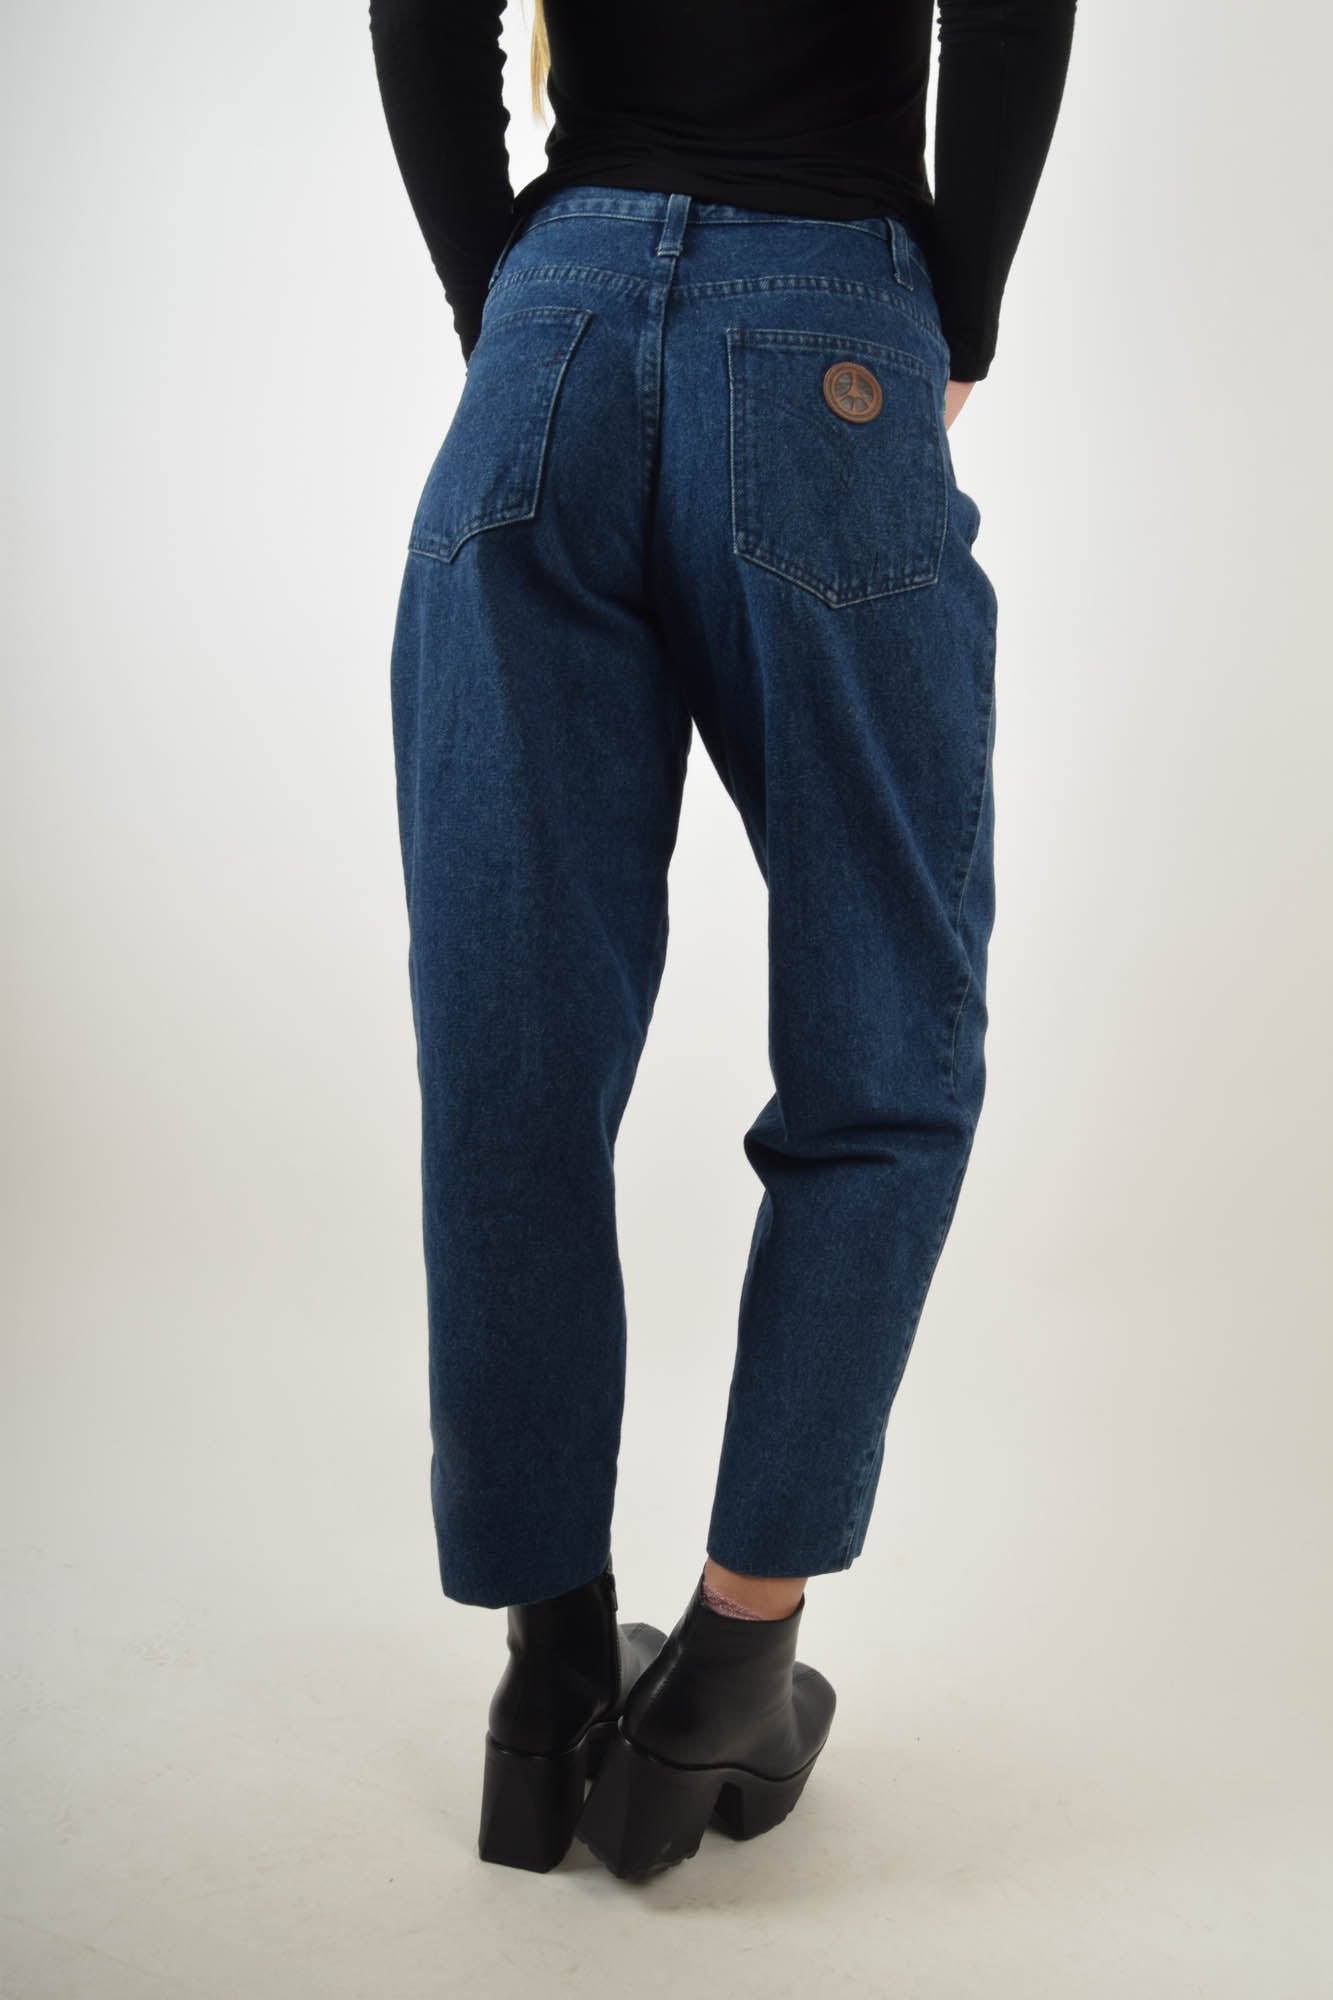 Vintage Moschino Mum Jeans Made in Italy 